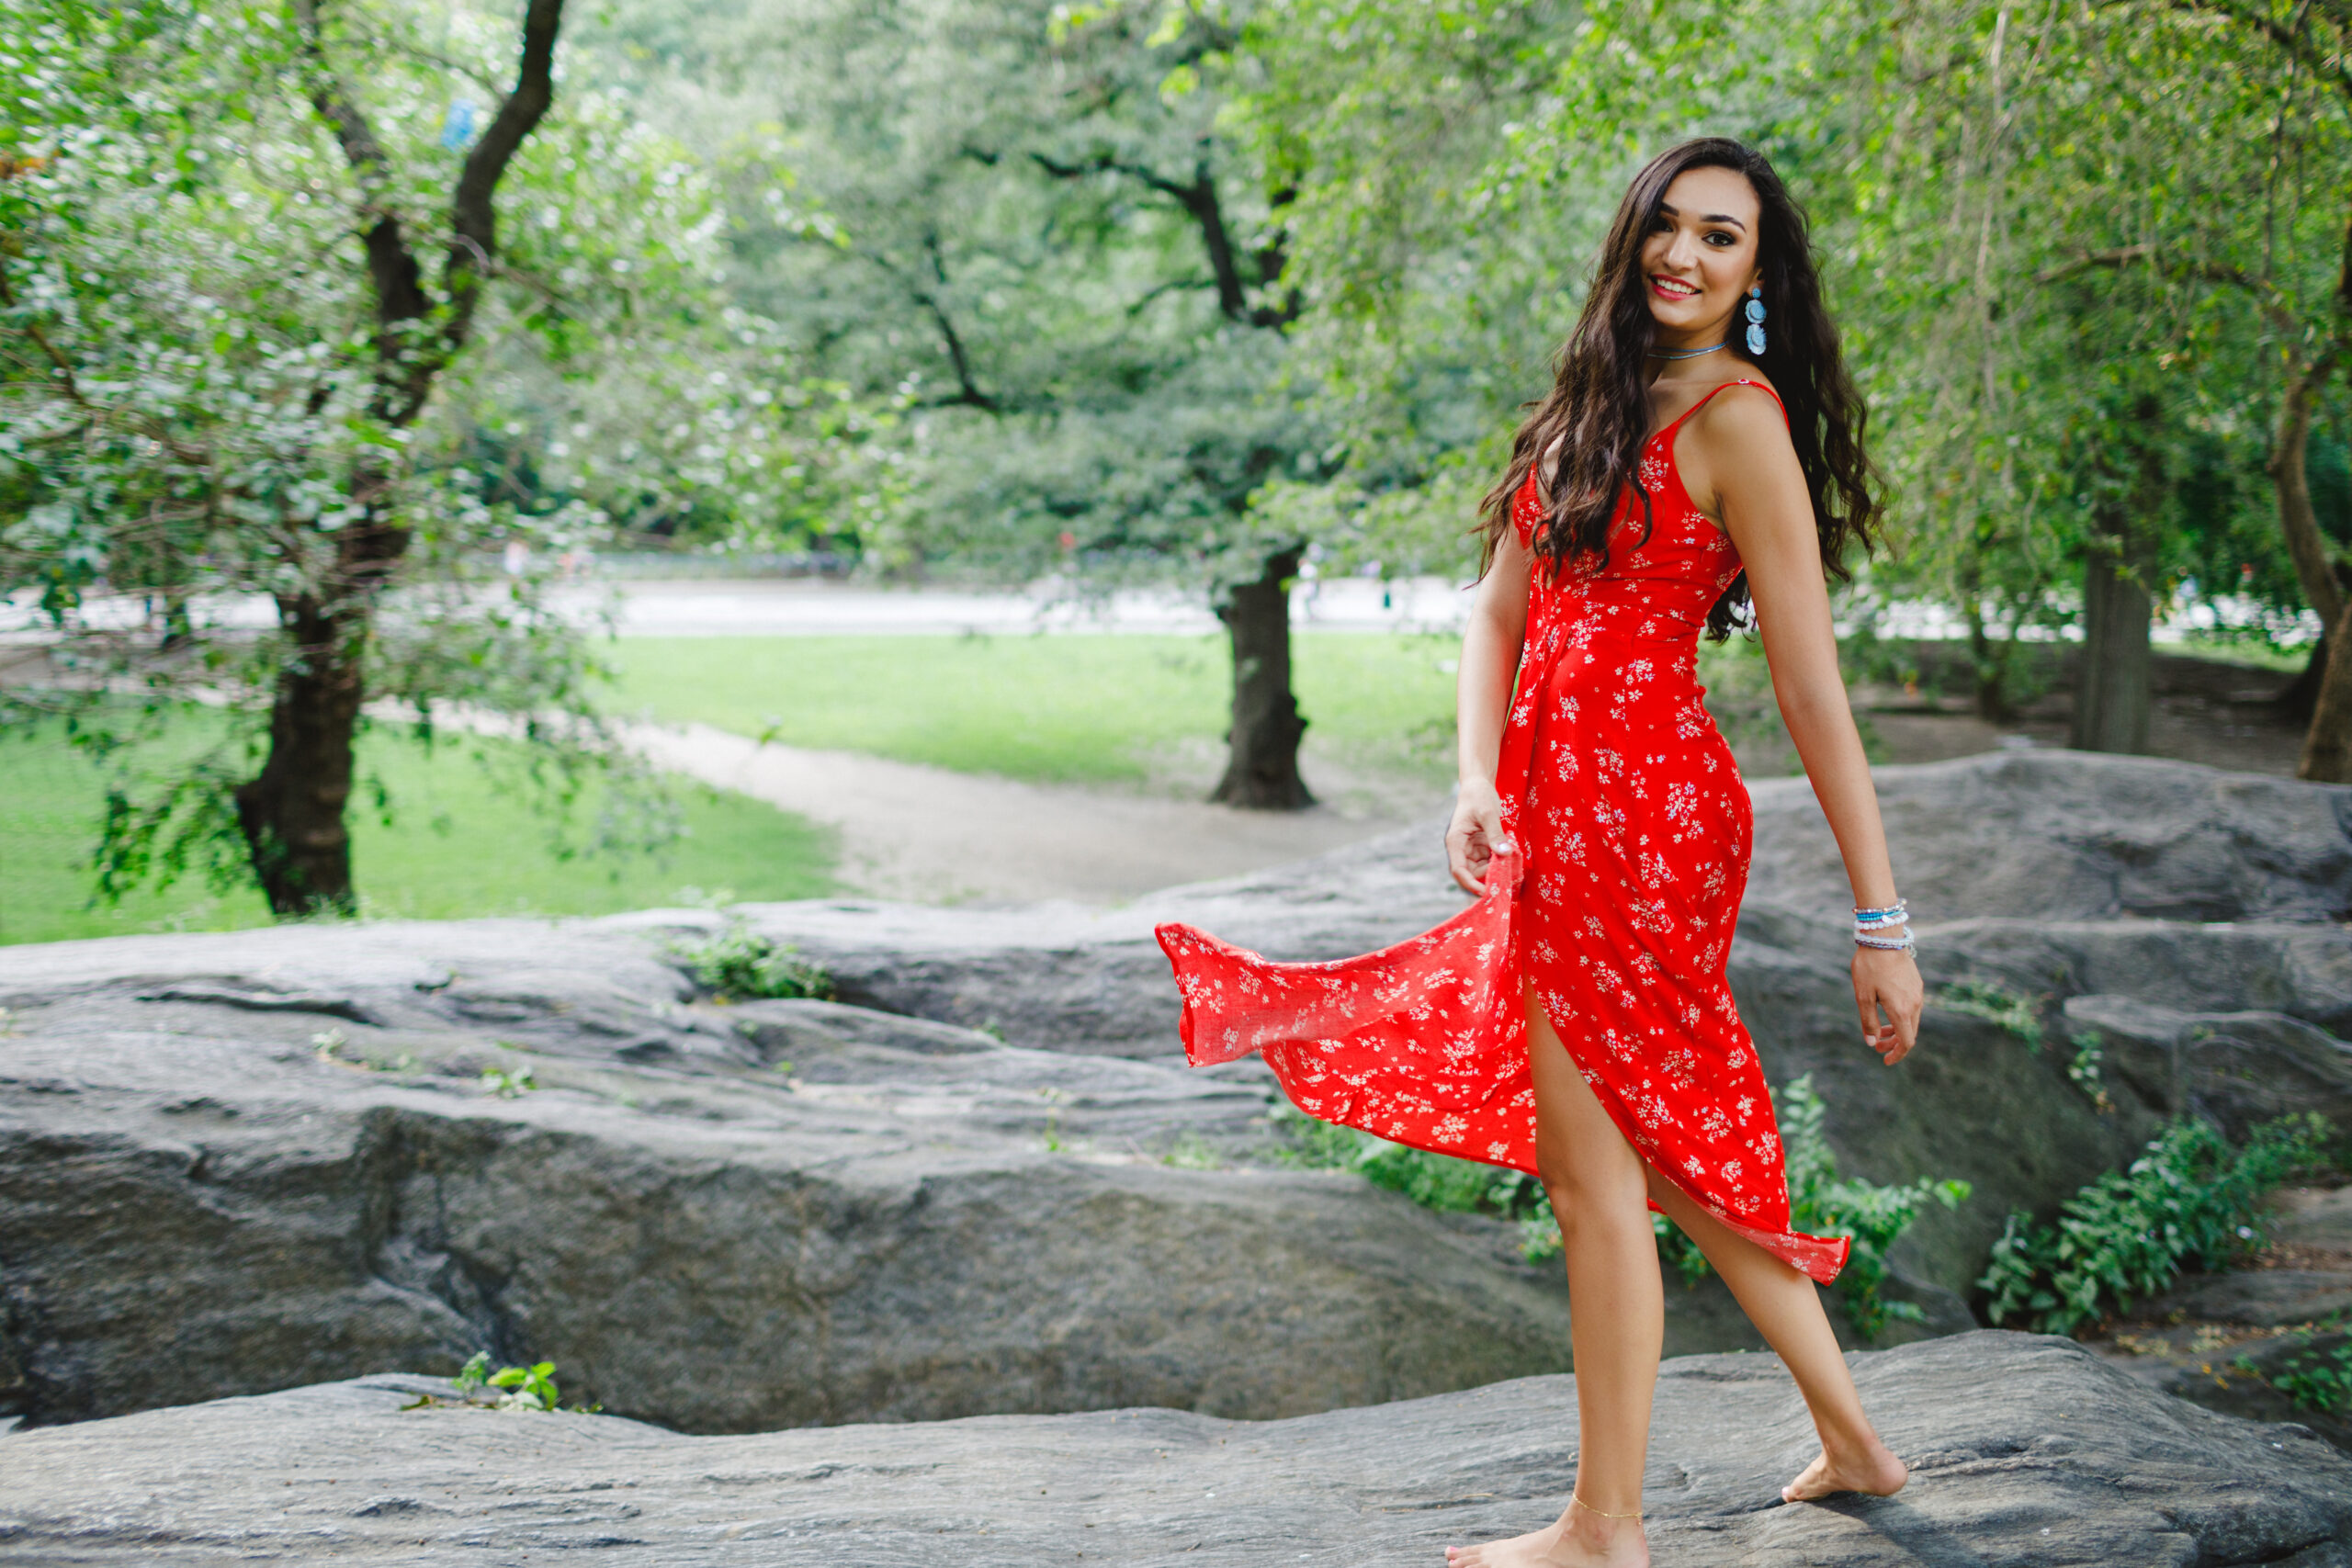 Senior Photo of a Brunette Model with long hair and red lipstick posing in Central Park in a red floral dress twirling her dress standing on a large rock